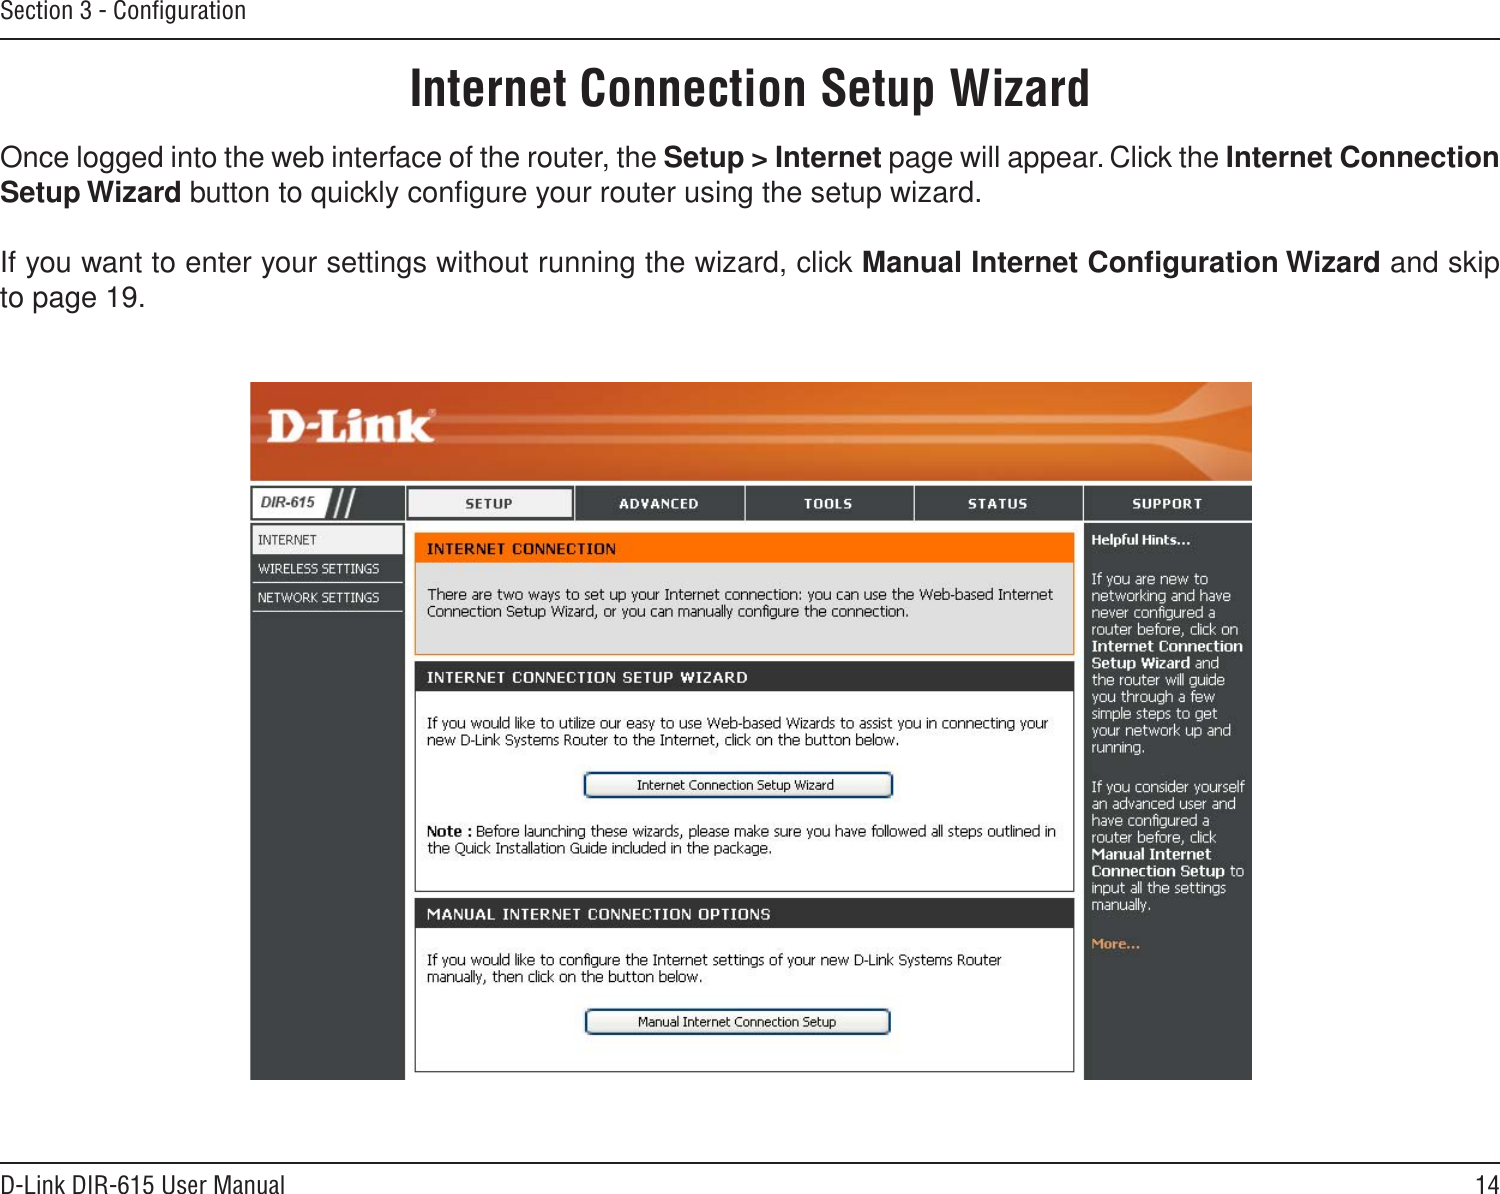 14D-Link DIR-615 User ManualSection 3 - ConﬁgurationInternet Connection Setup WizardOnce logged into the web interface of the router, the Setup &gt; Internet page will appear. Click the Internet Connection Setup Wizard button to quickly conﬁgure your router using the setup wizard.If you want to enter your settings without running the wizard, click Manual Internet Conﬁguration Wizard and skip to page 19.